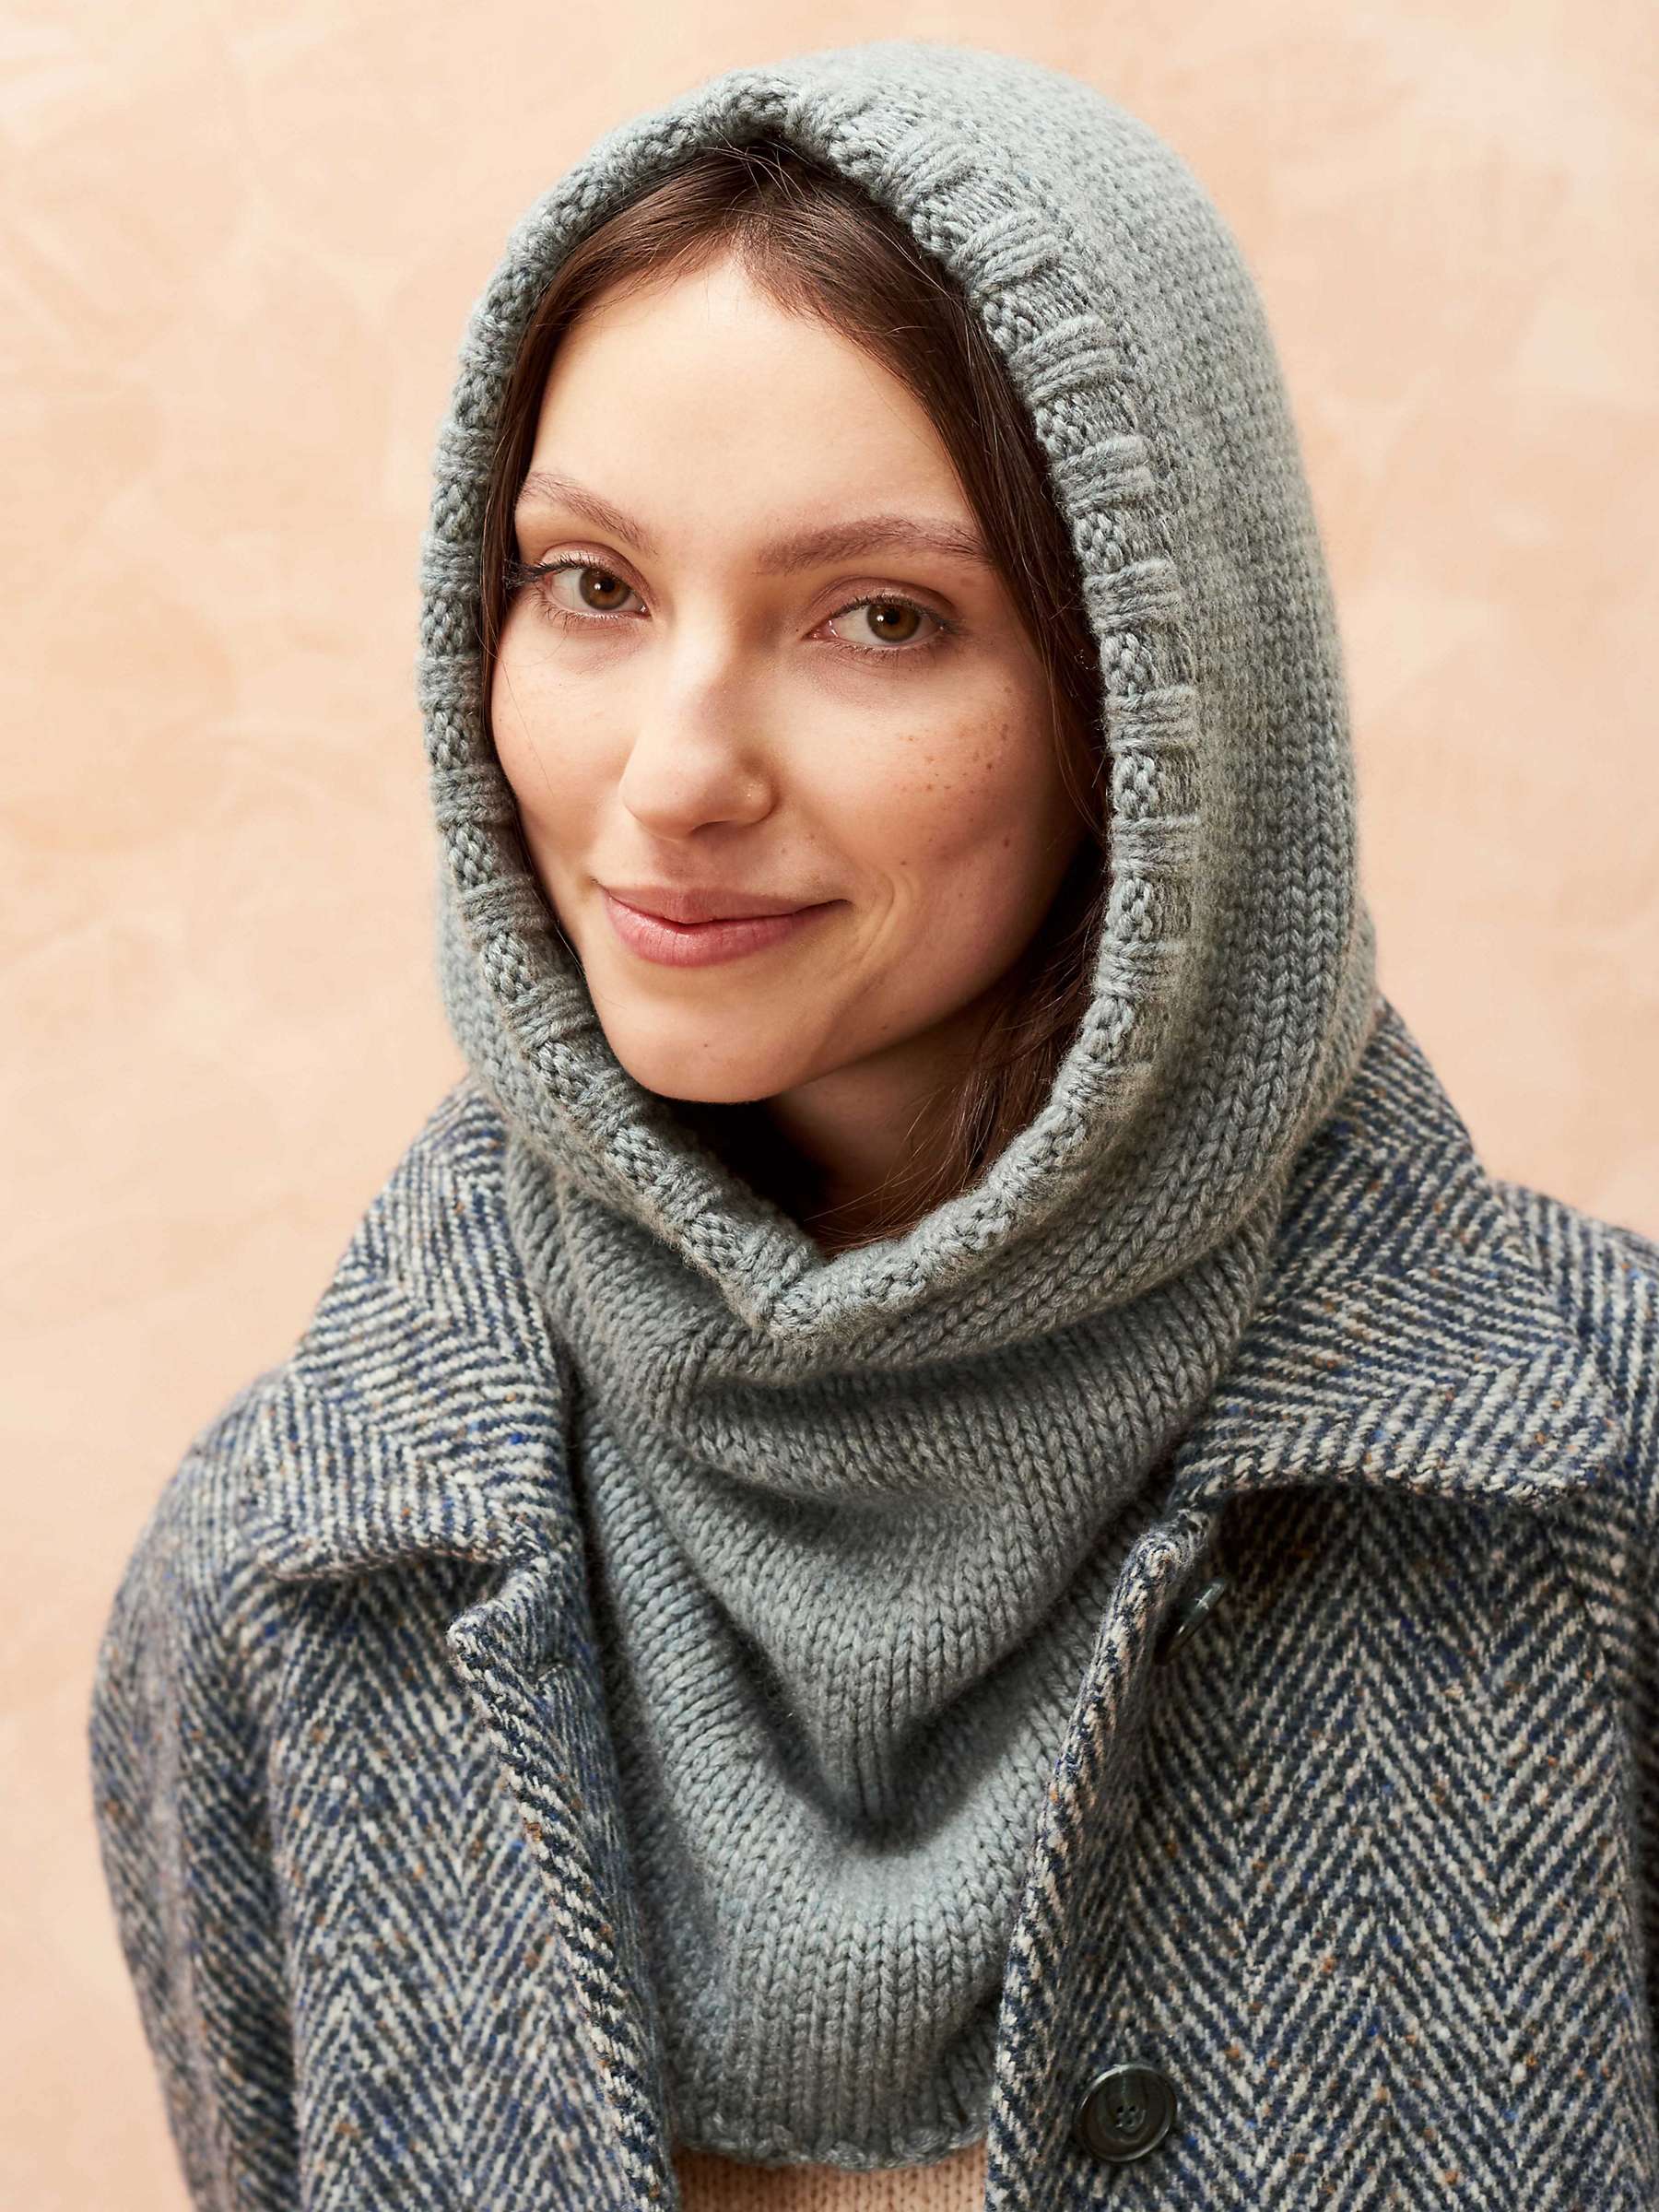 Buy Brora Cashmere Luxe Knit Hooded Snood Online at johnlewis.com